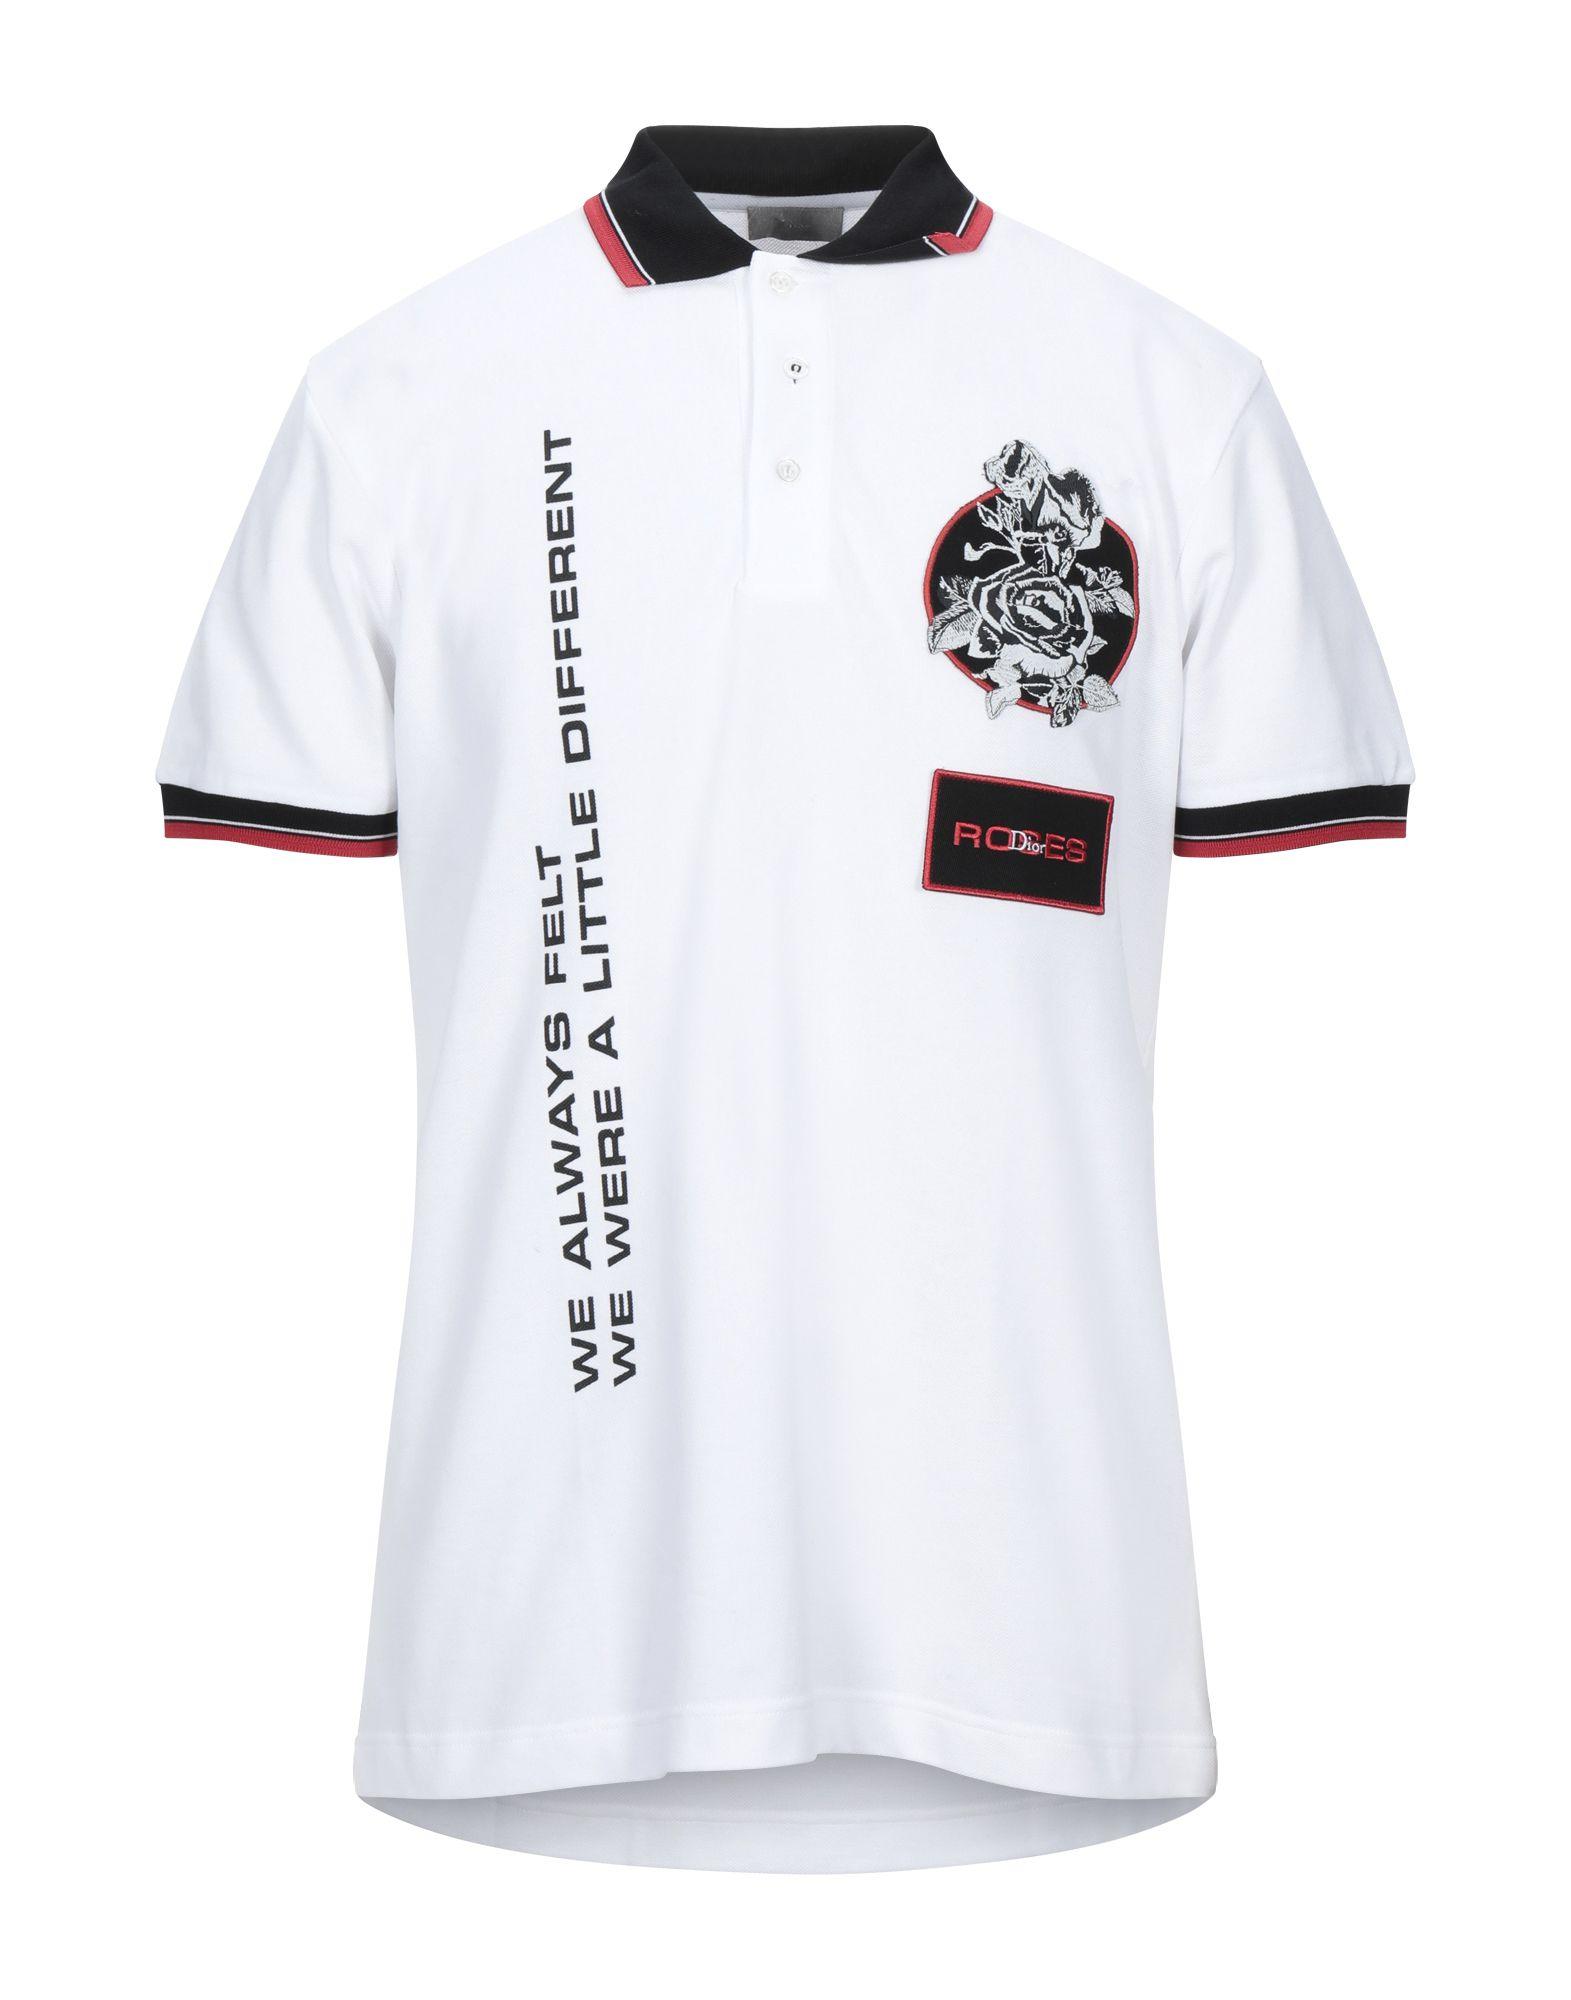 Dior Cotton Polo Shirt in White for Men - Lyst